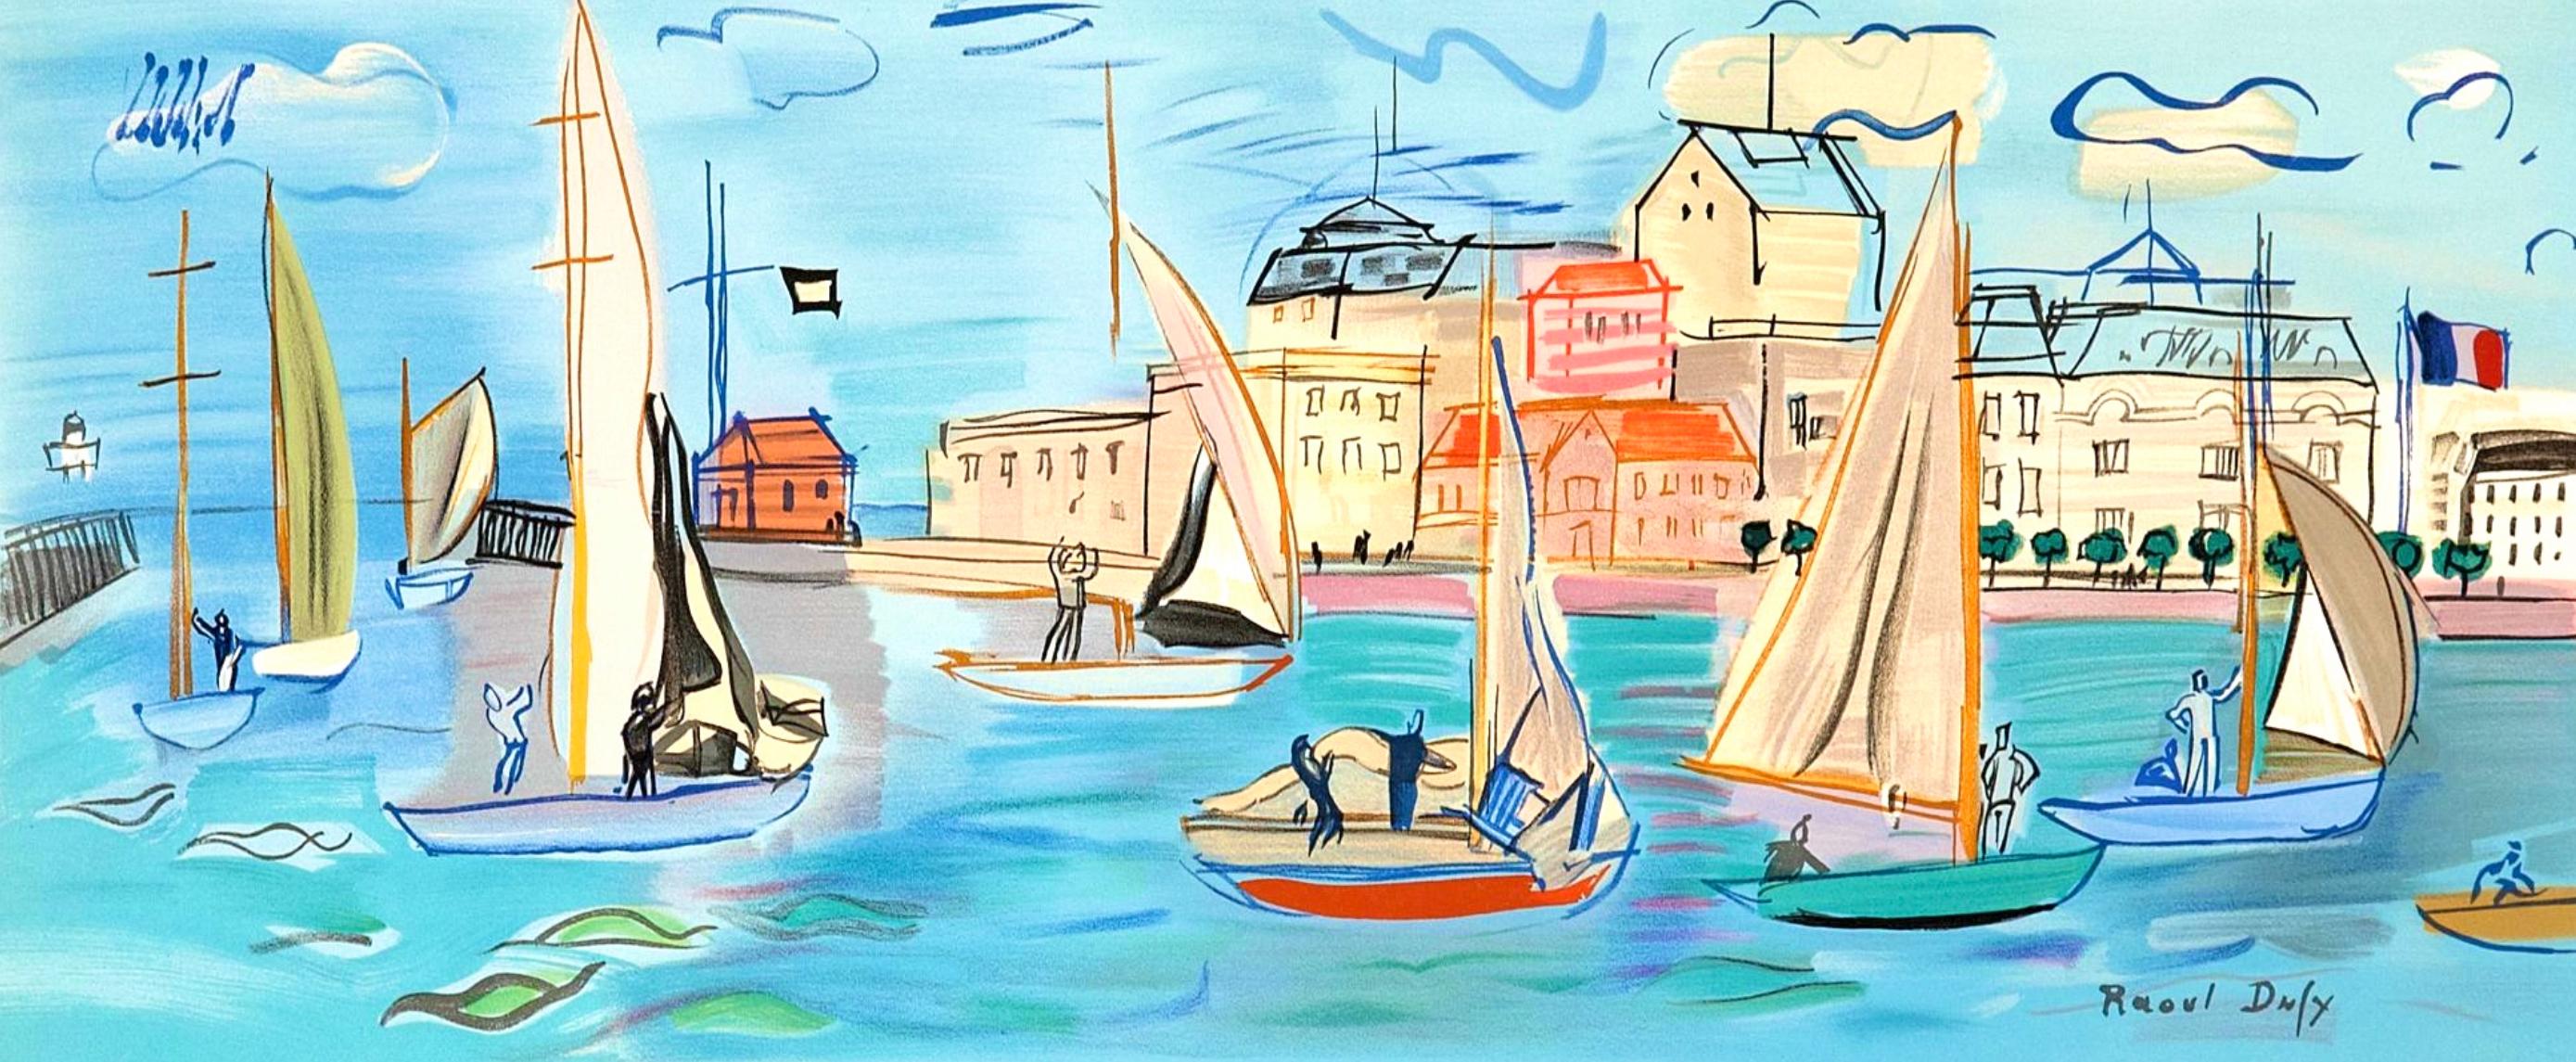 Lithograph on vélin d'Arches. Inscription: Unsigned and unnumbered. Good condition. Notes: From the folio, Raoul Dufy, IV, Collection Pierre Levy, 1969; published by Fernand Mourlot, Paris; printed by Mourlot Frères, Paris, November 4, 1969.